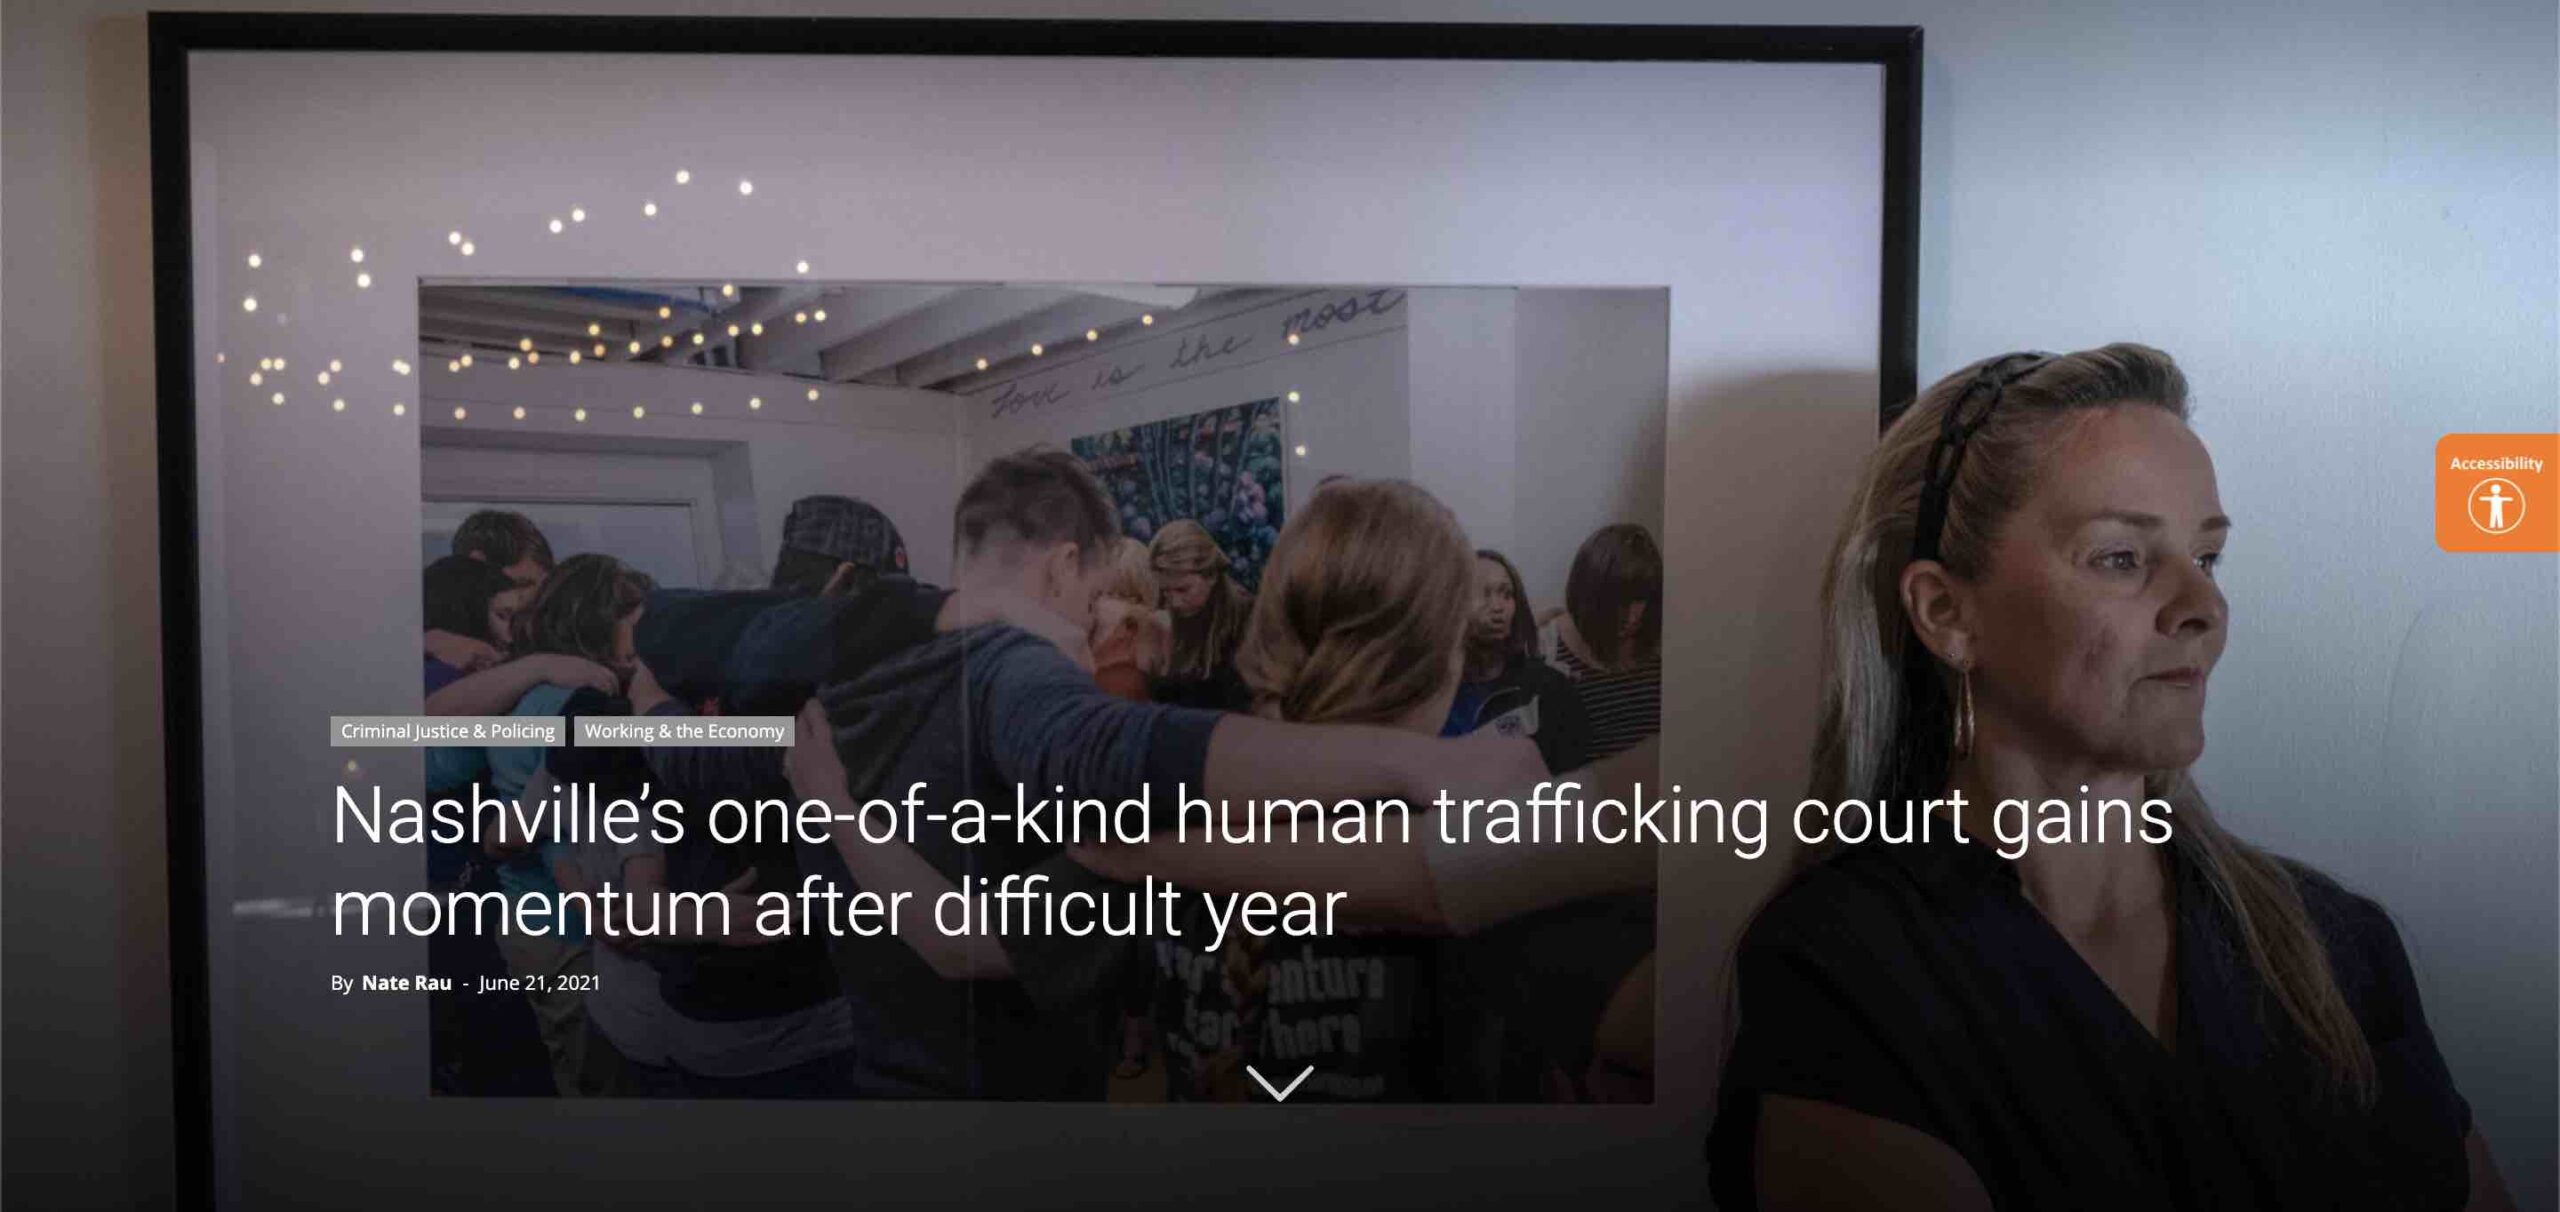 Nashville’s One-of-a-Kind Human Trafficking Court Gains Momentum After Difficult Year